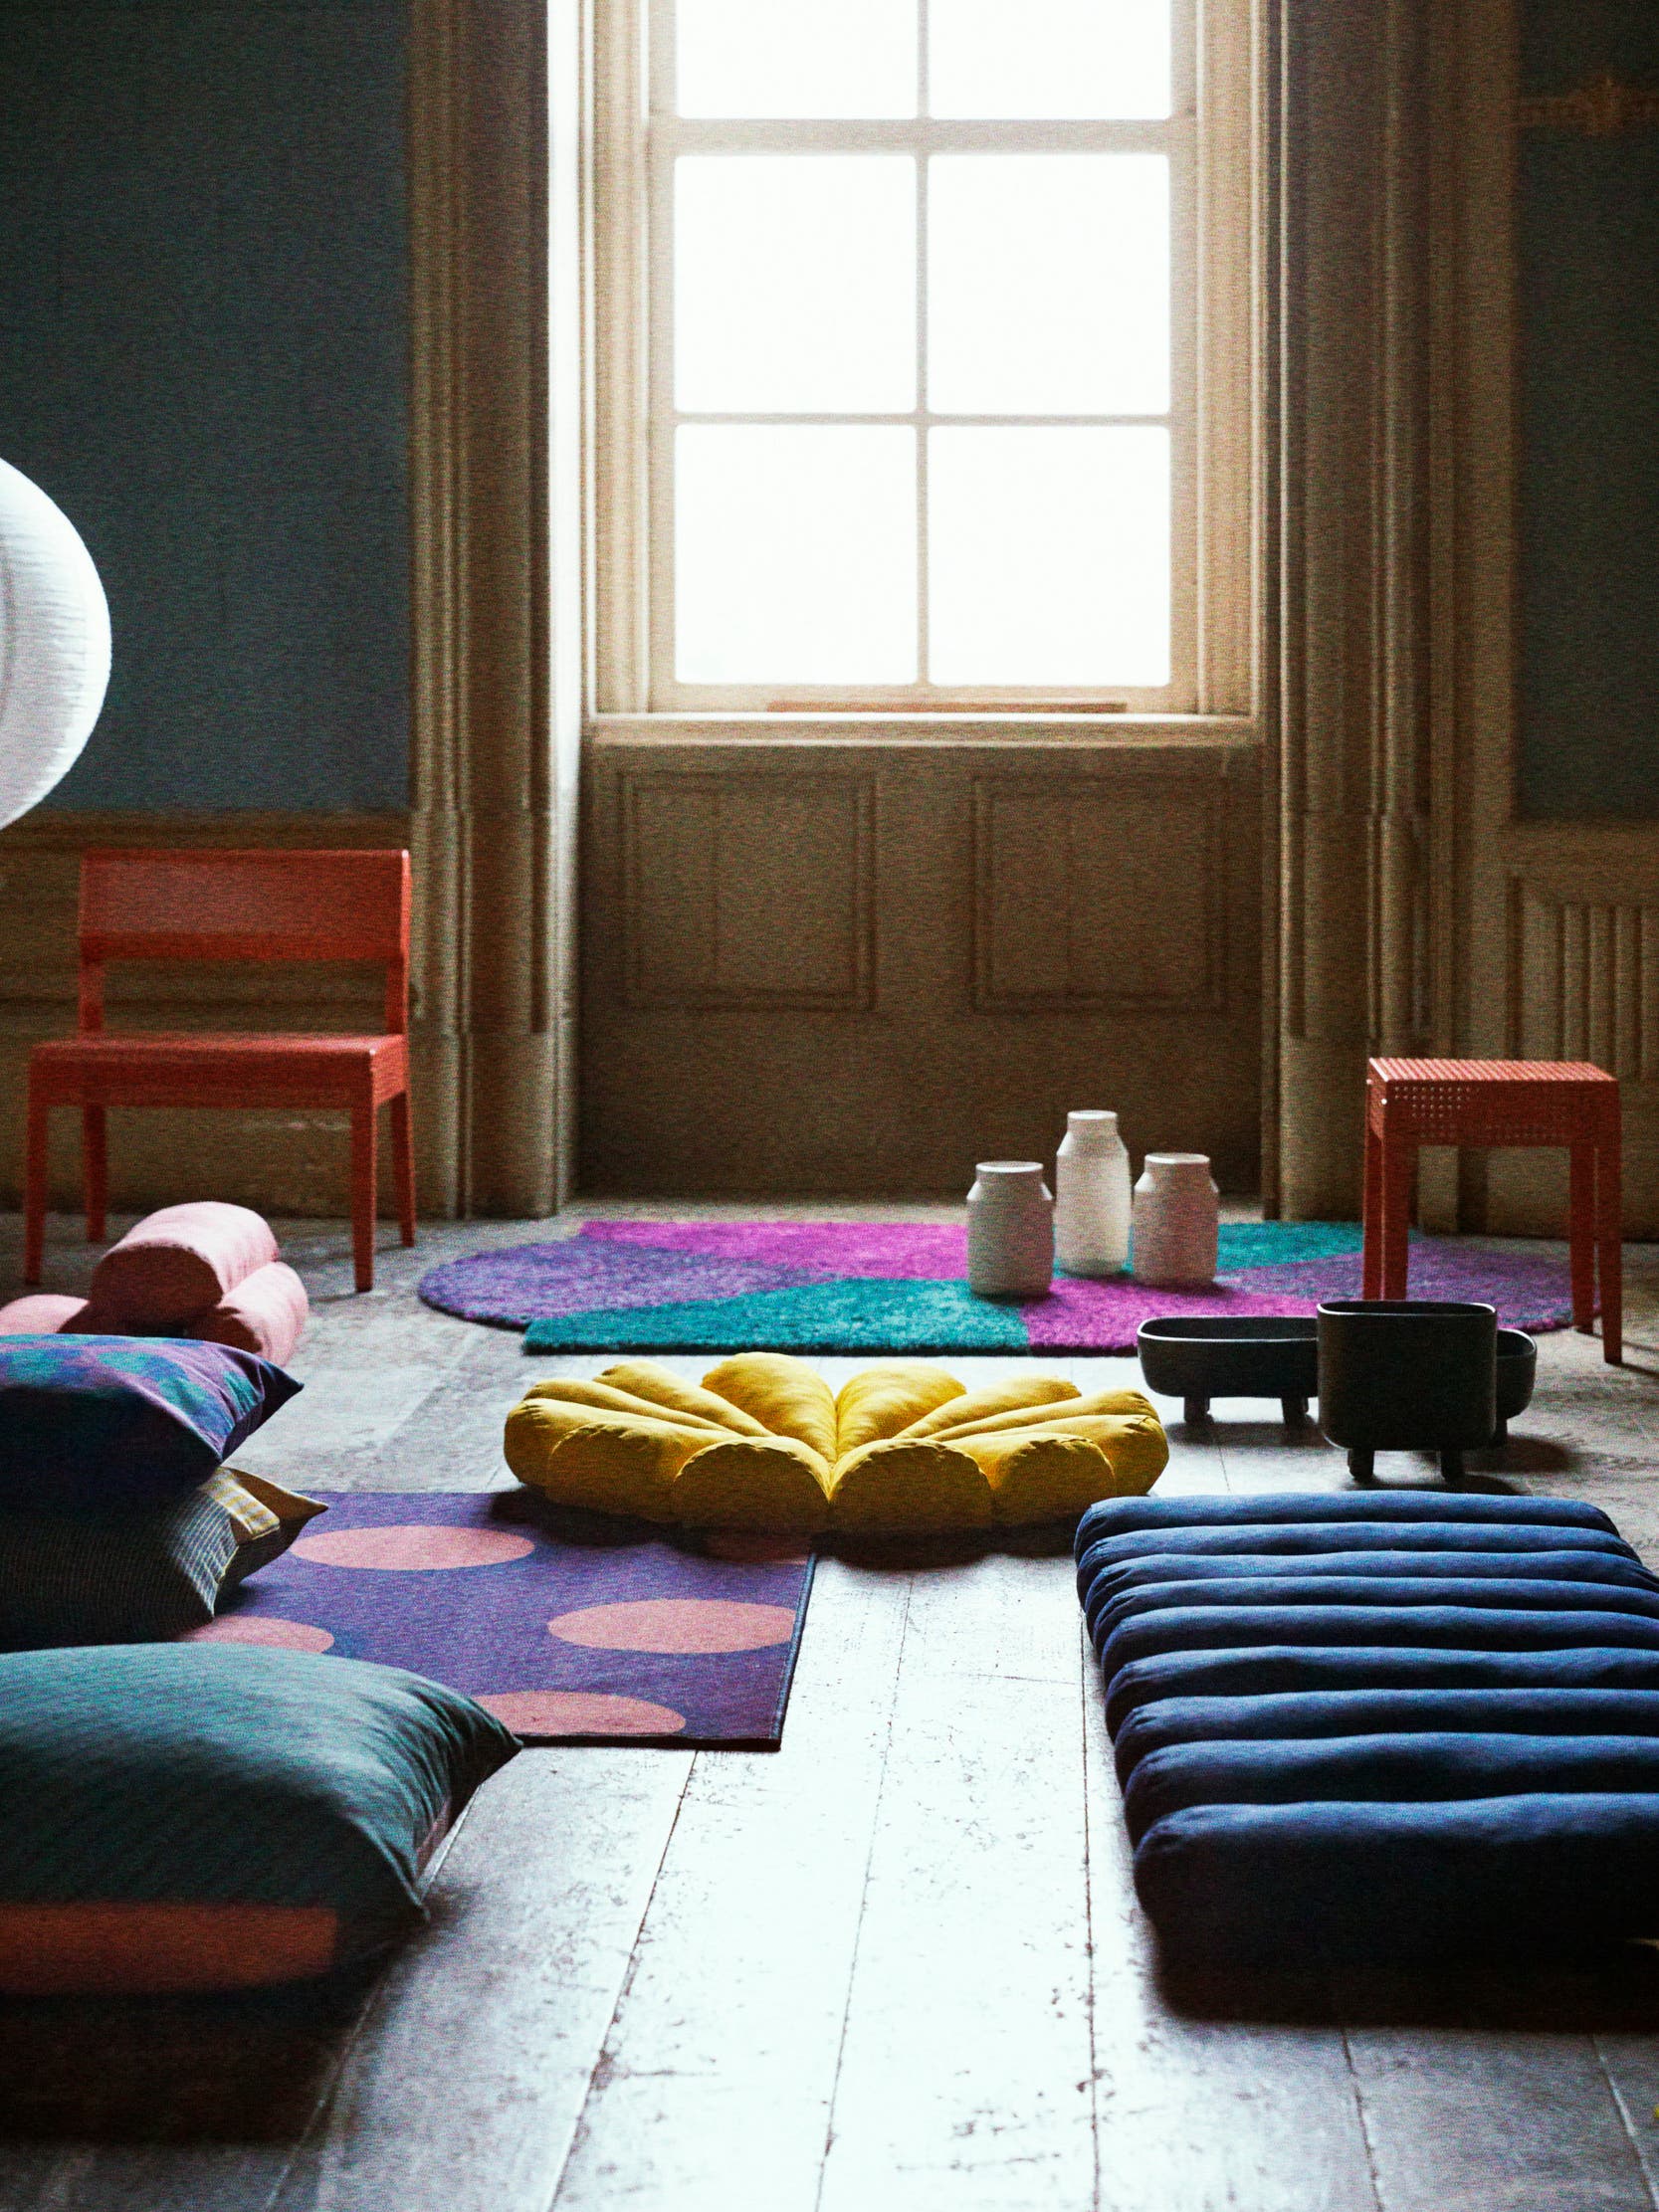 The Unlikely Inspiration Behind Ikea’s Latest Collection